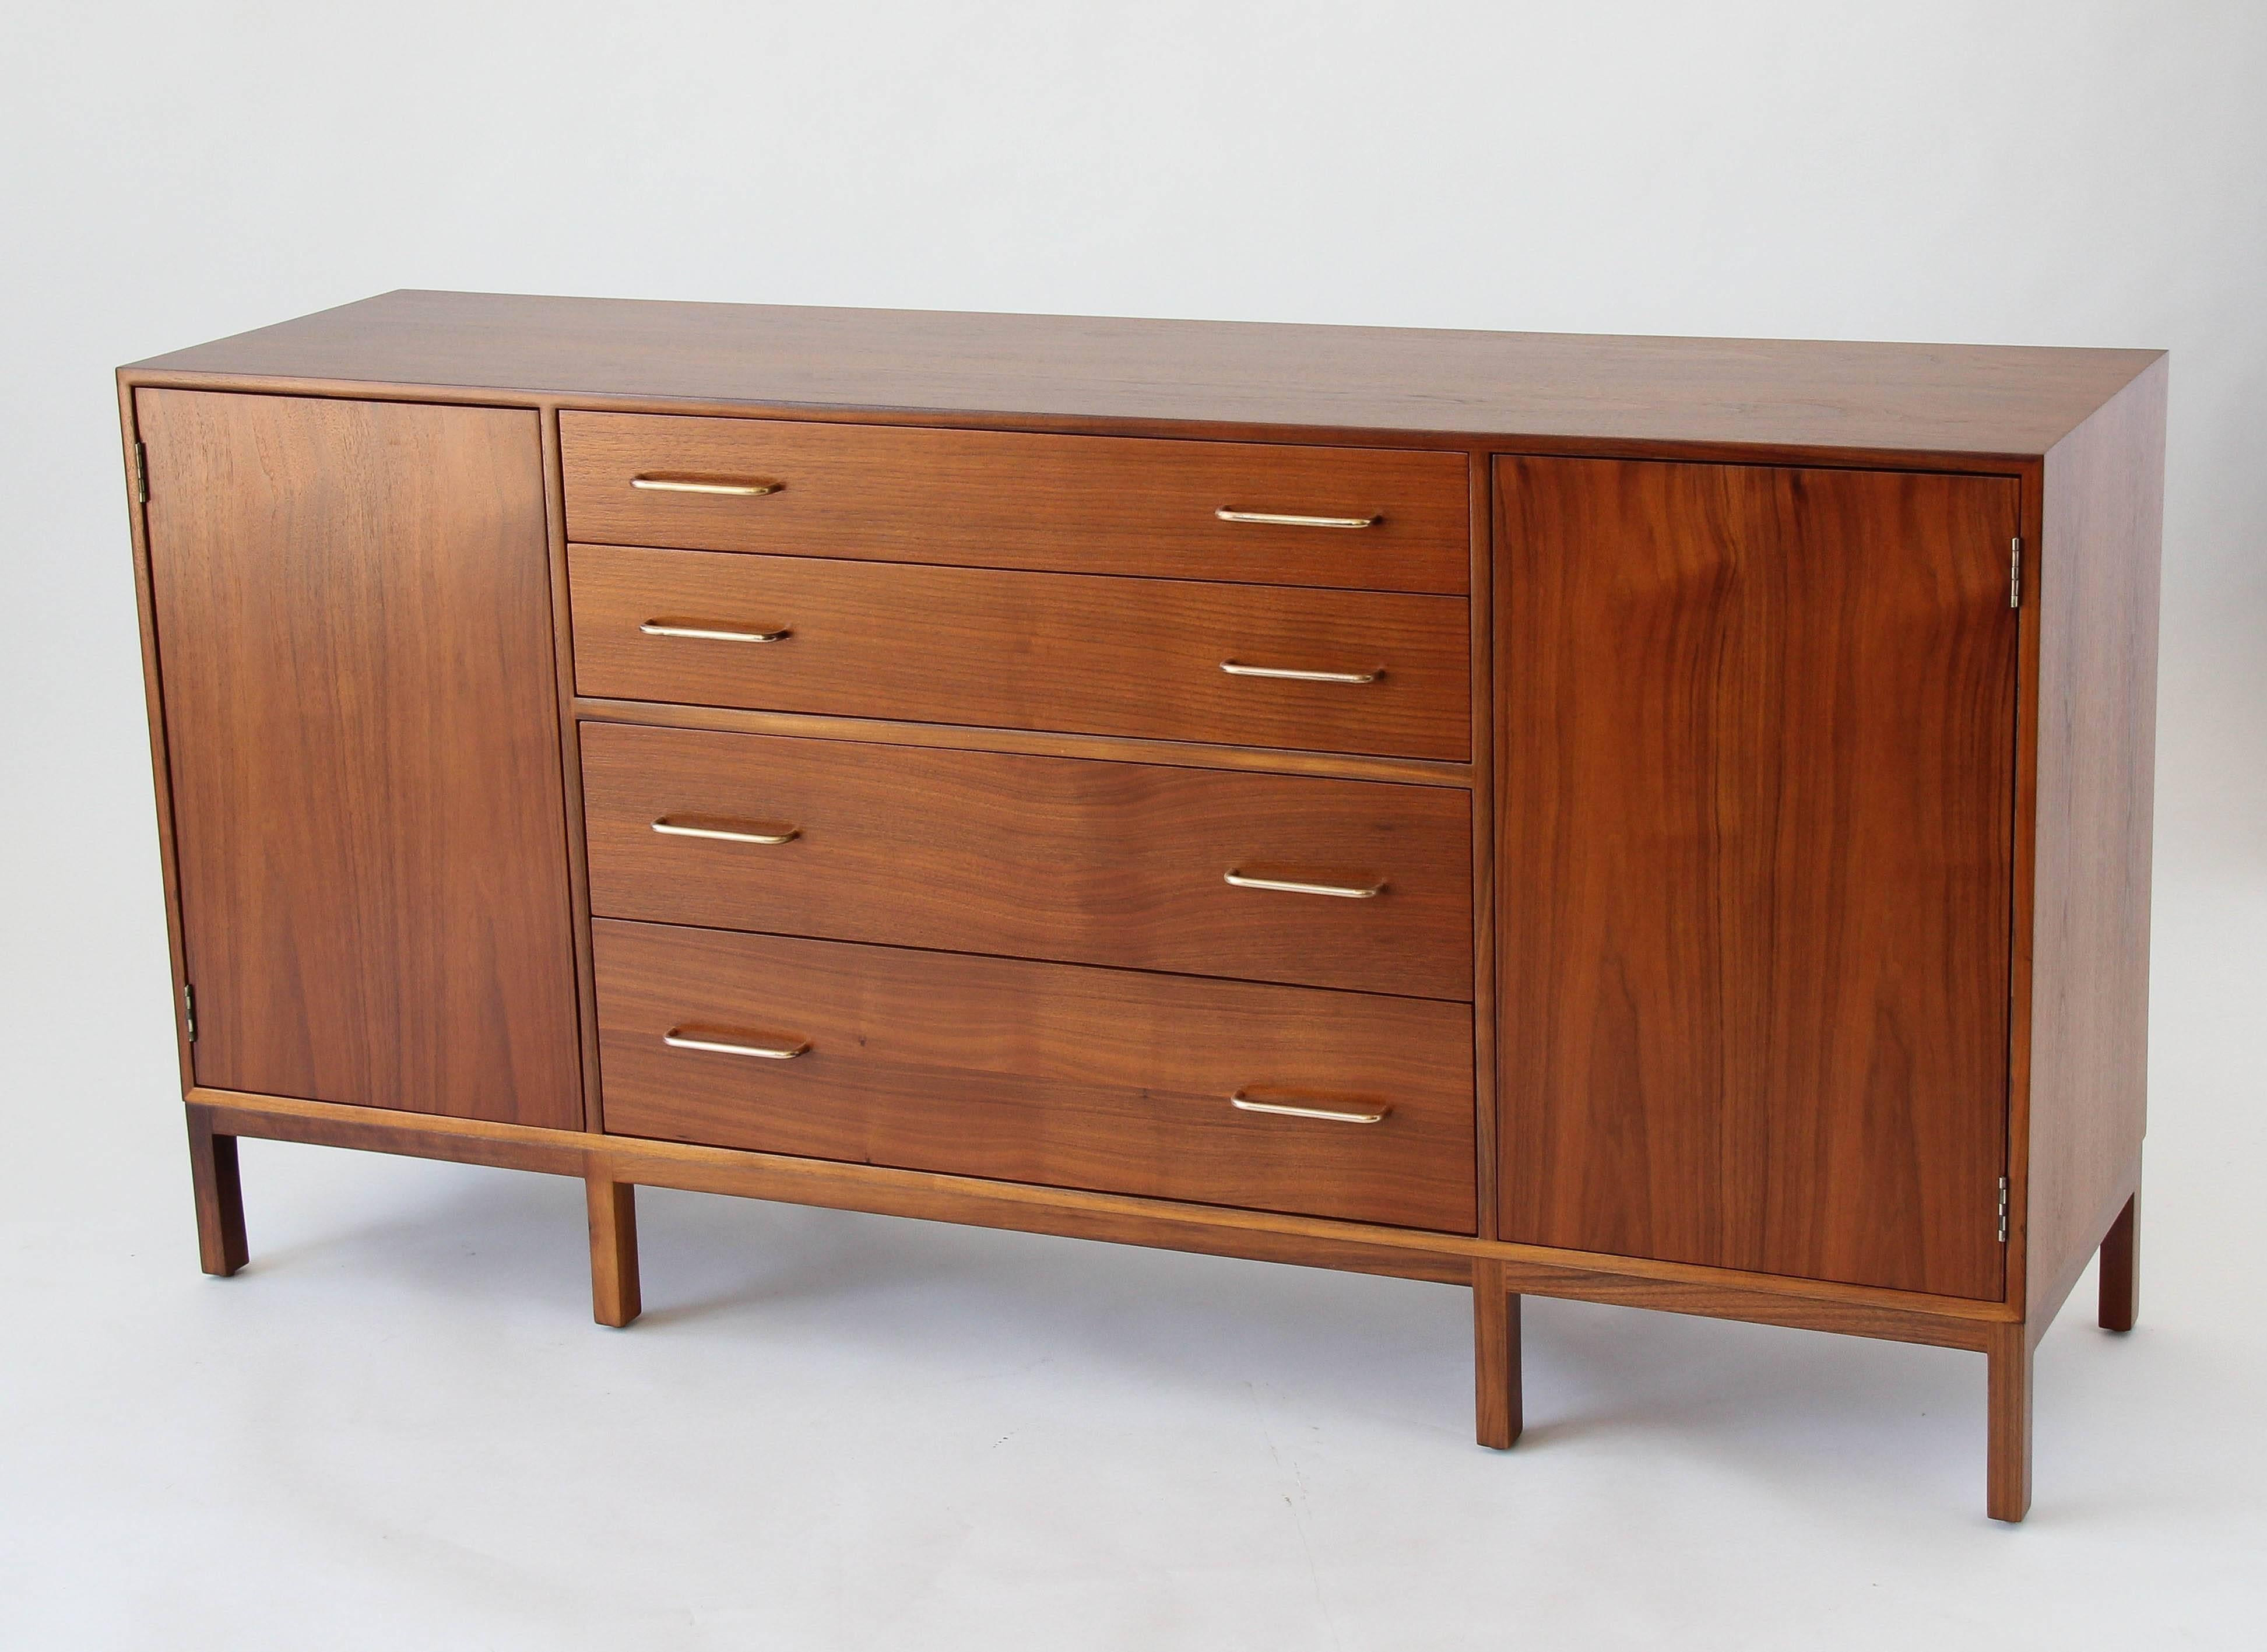 Mid-Century Modern Sideboard in Mahogany and Brass by Edward Wormley for Dunbar